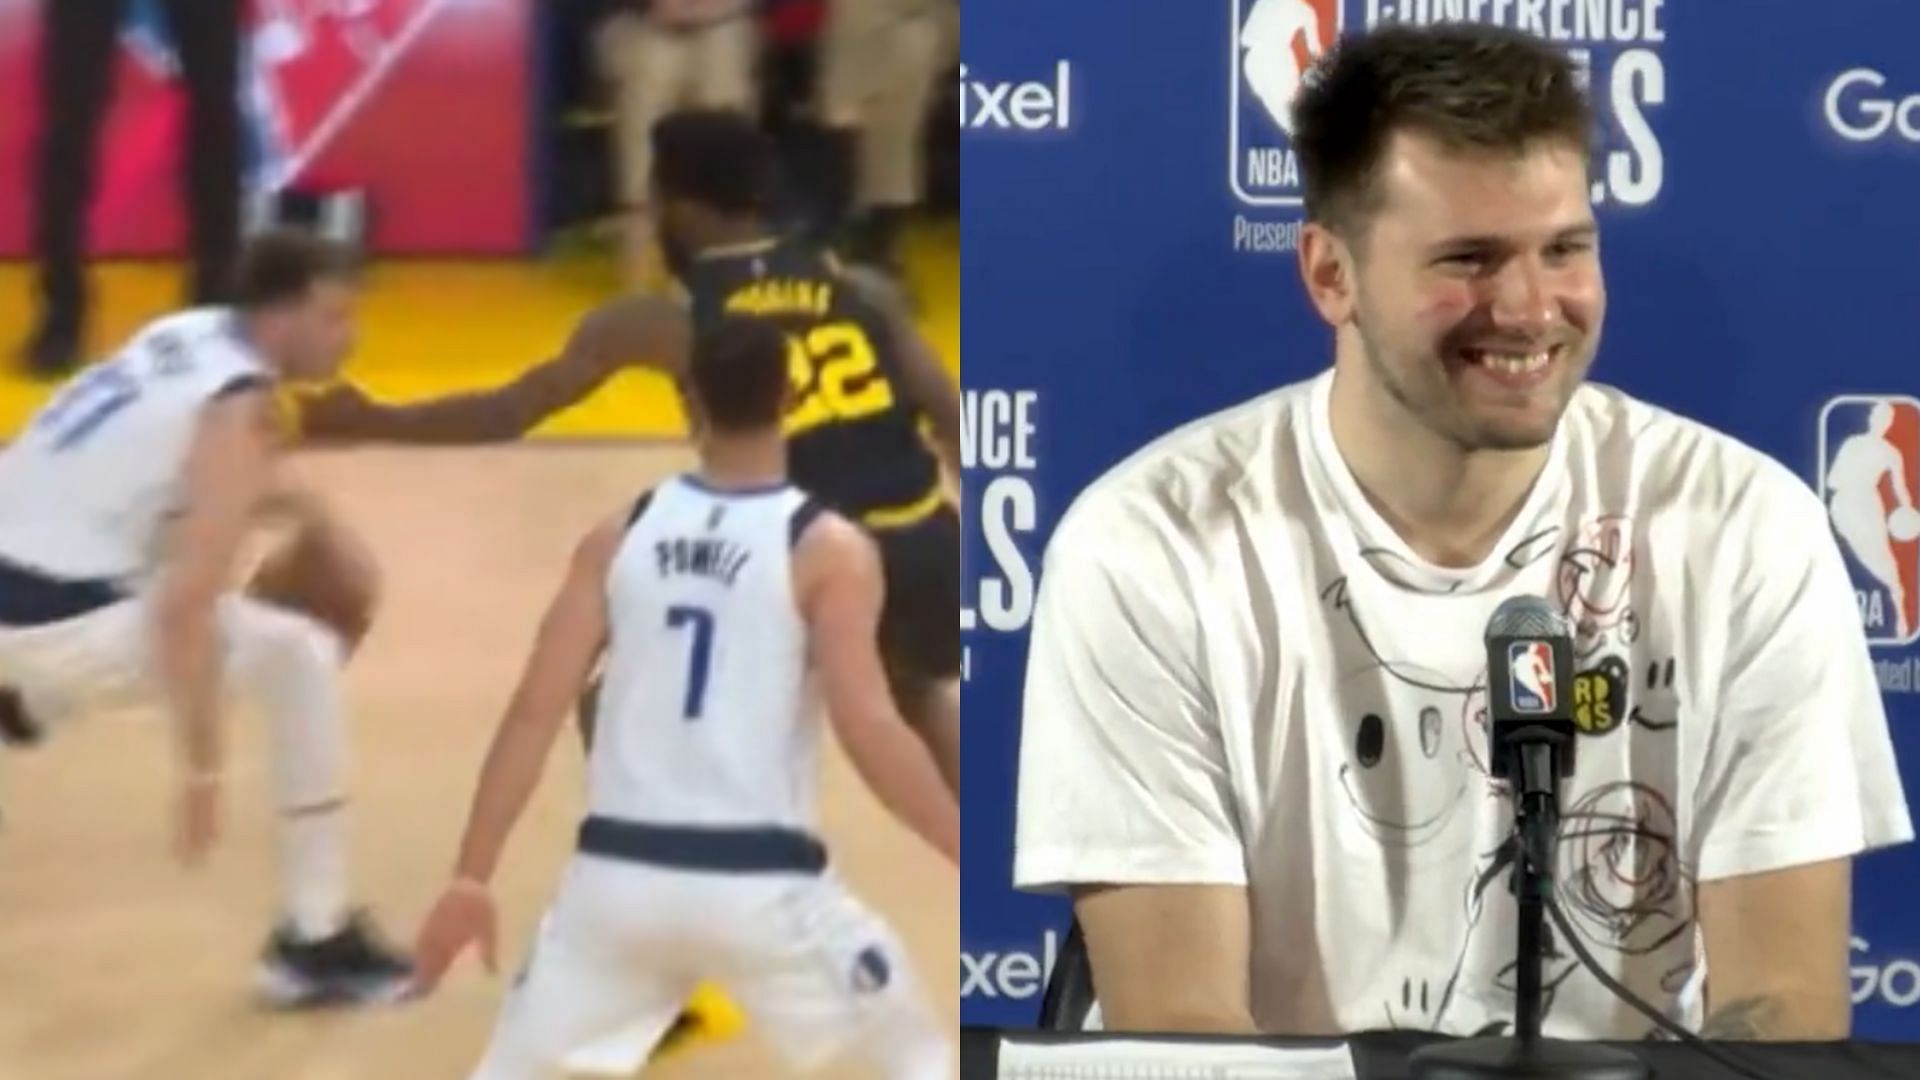 Luka Doncic reacted positively to the swipe on the face from Andrew Wiggins in his post game interview